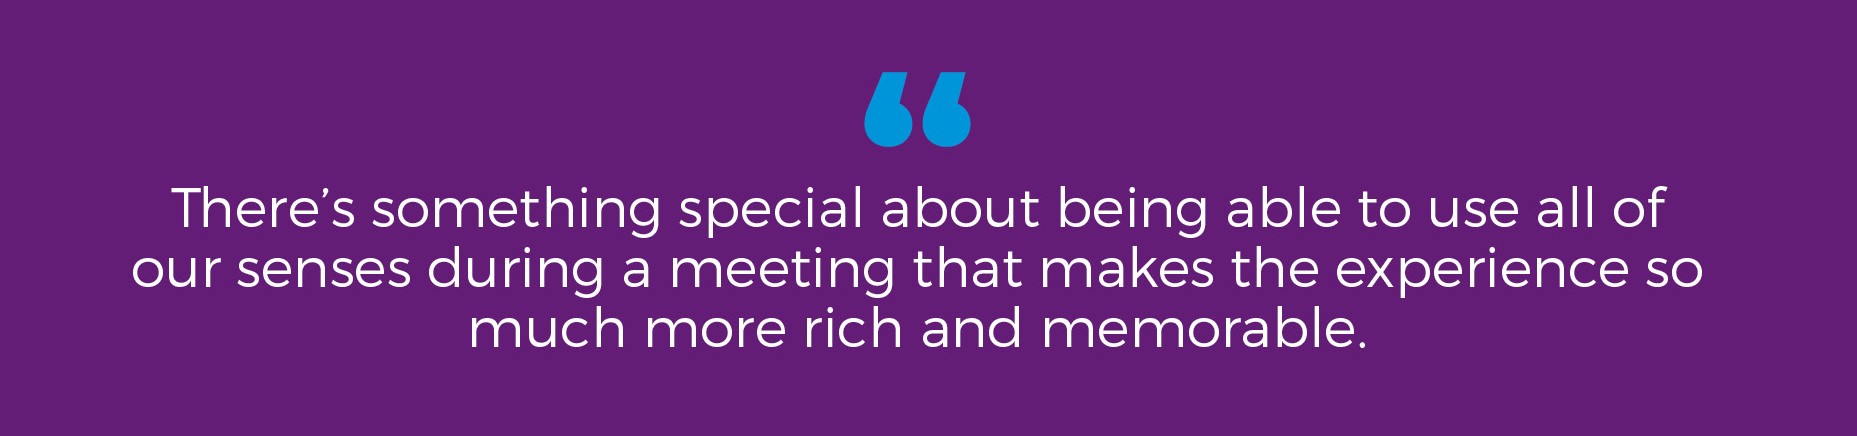 "There's something special about being able to use all of our senses during a meeting that makes the experience so much more rich and memorable."